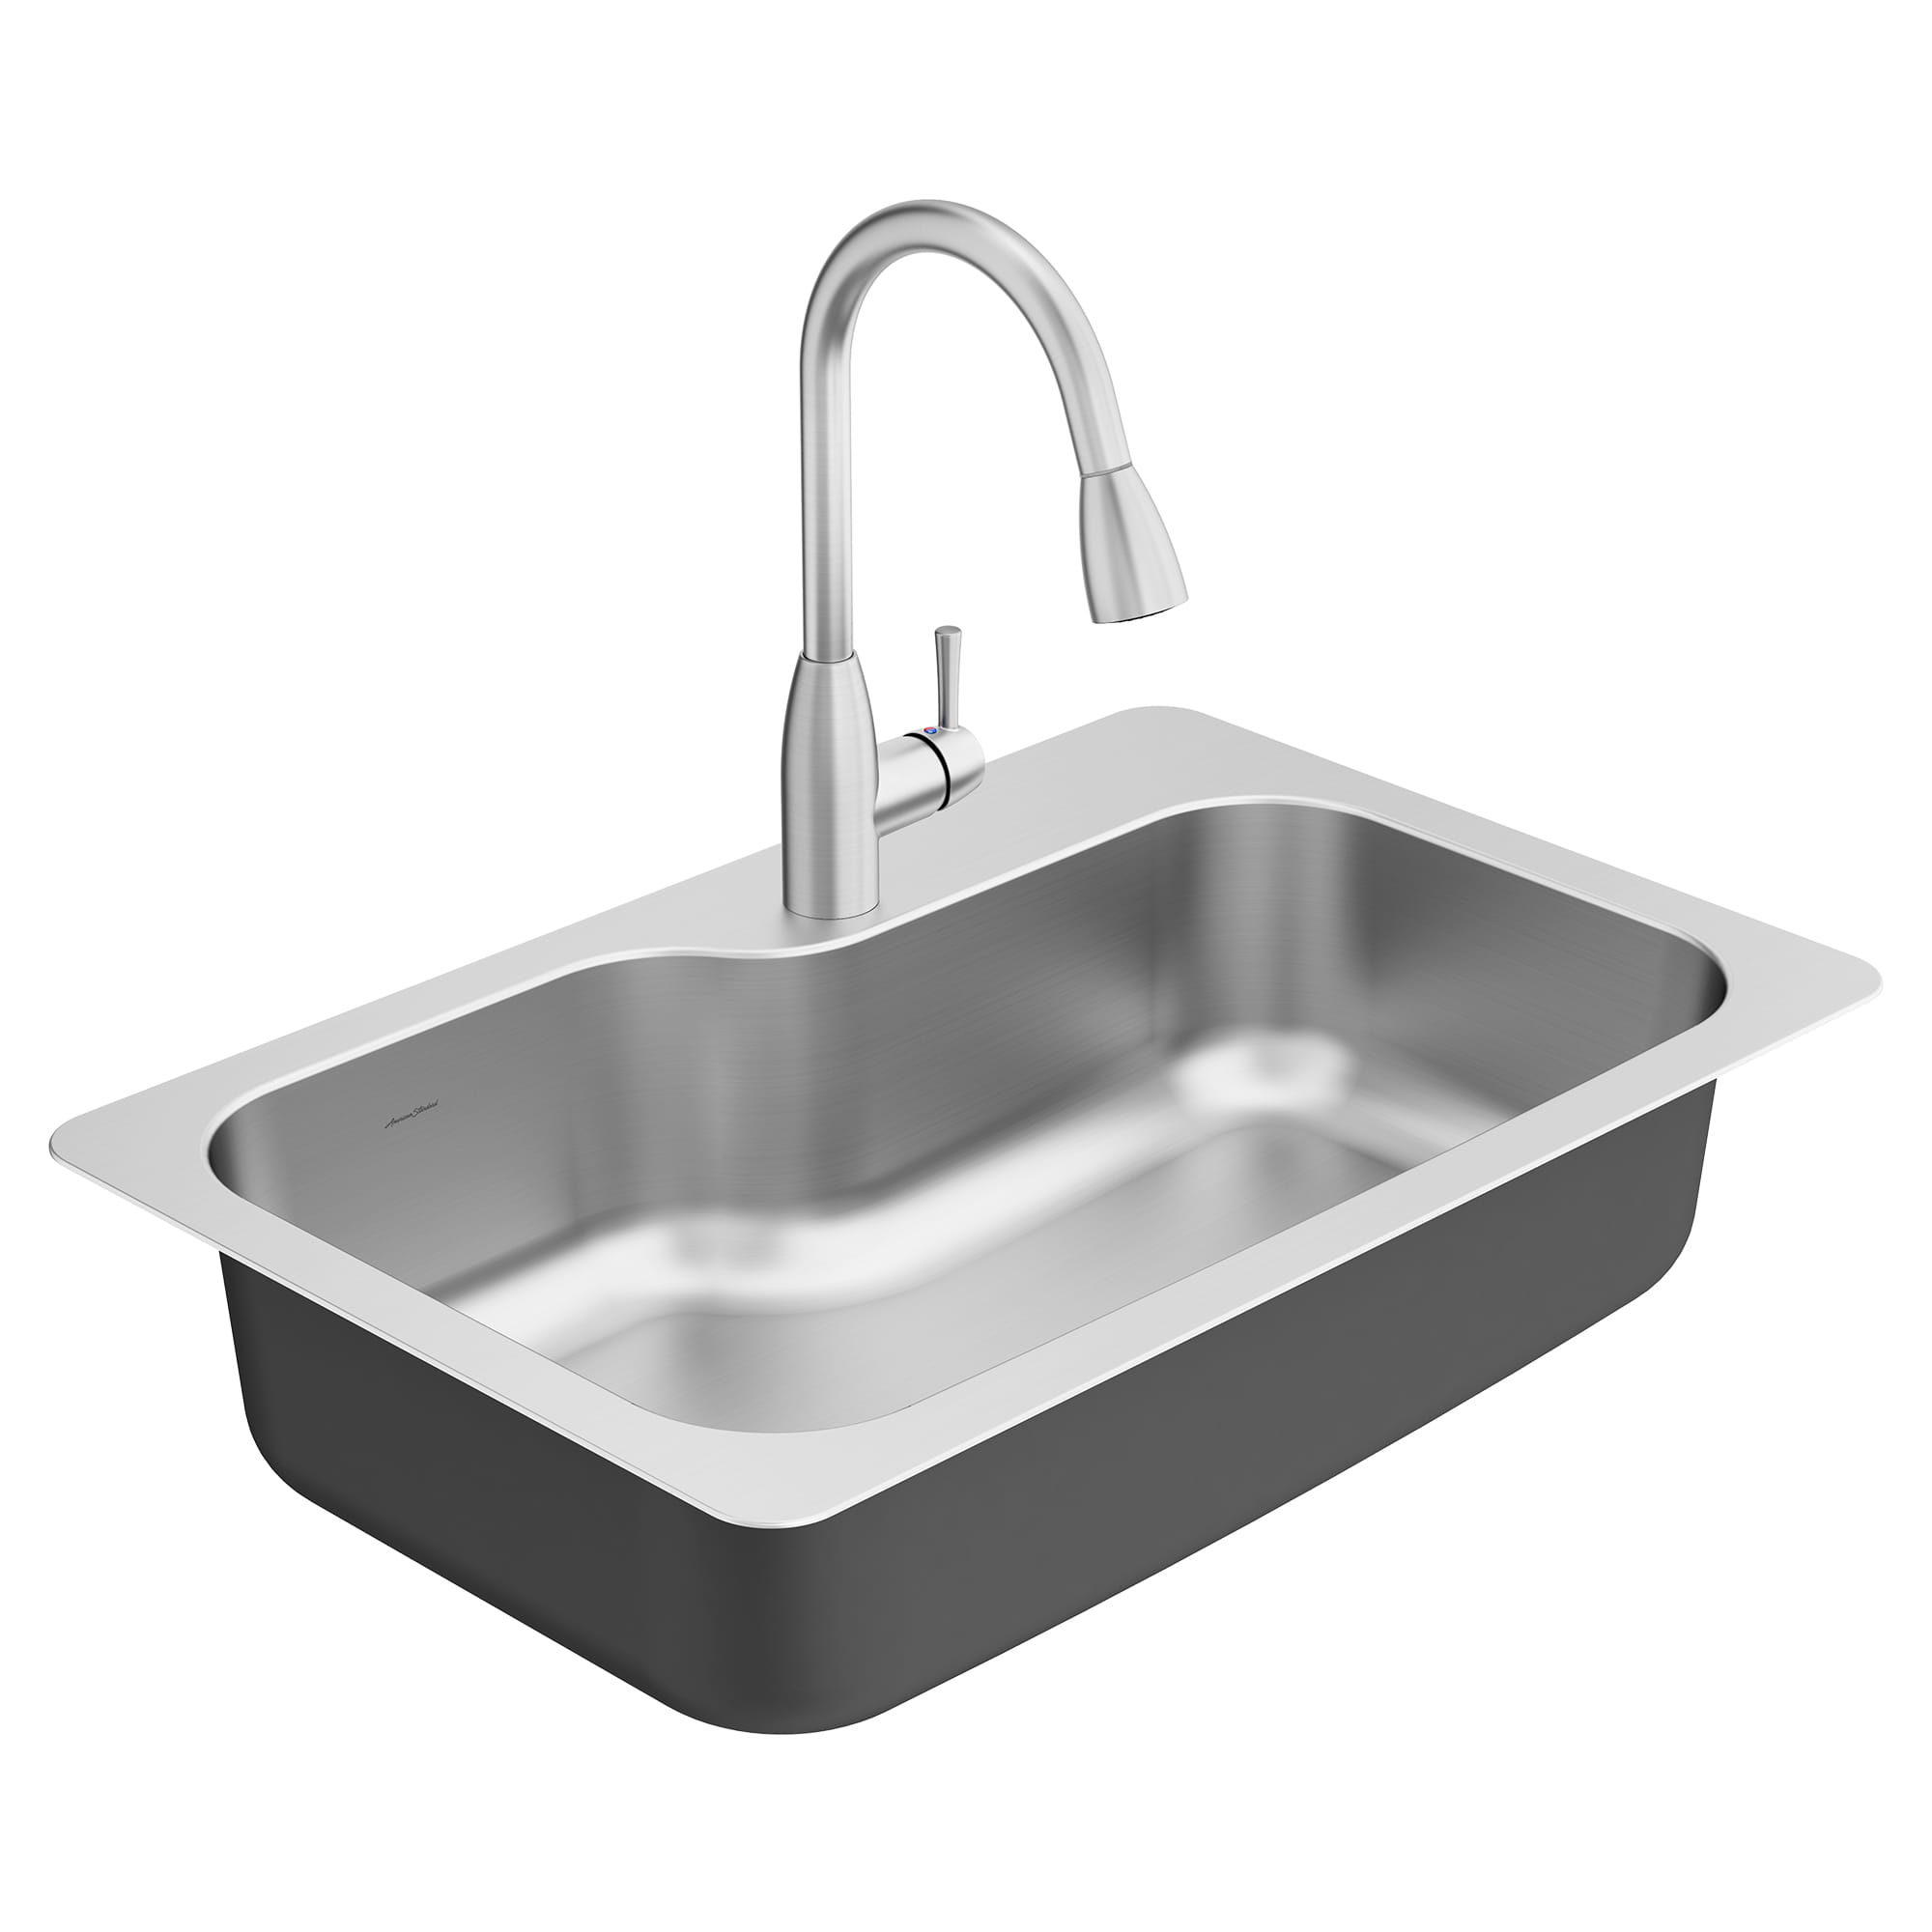 Revamp Your Kitchen - Learn How to Caulk a Stainless Steel Sink Today!